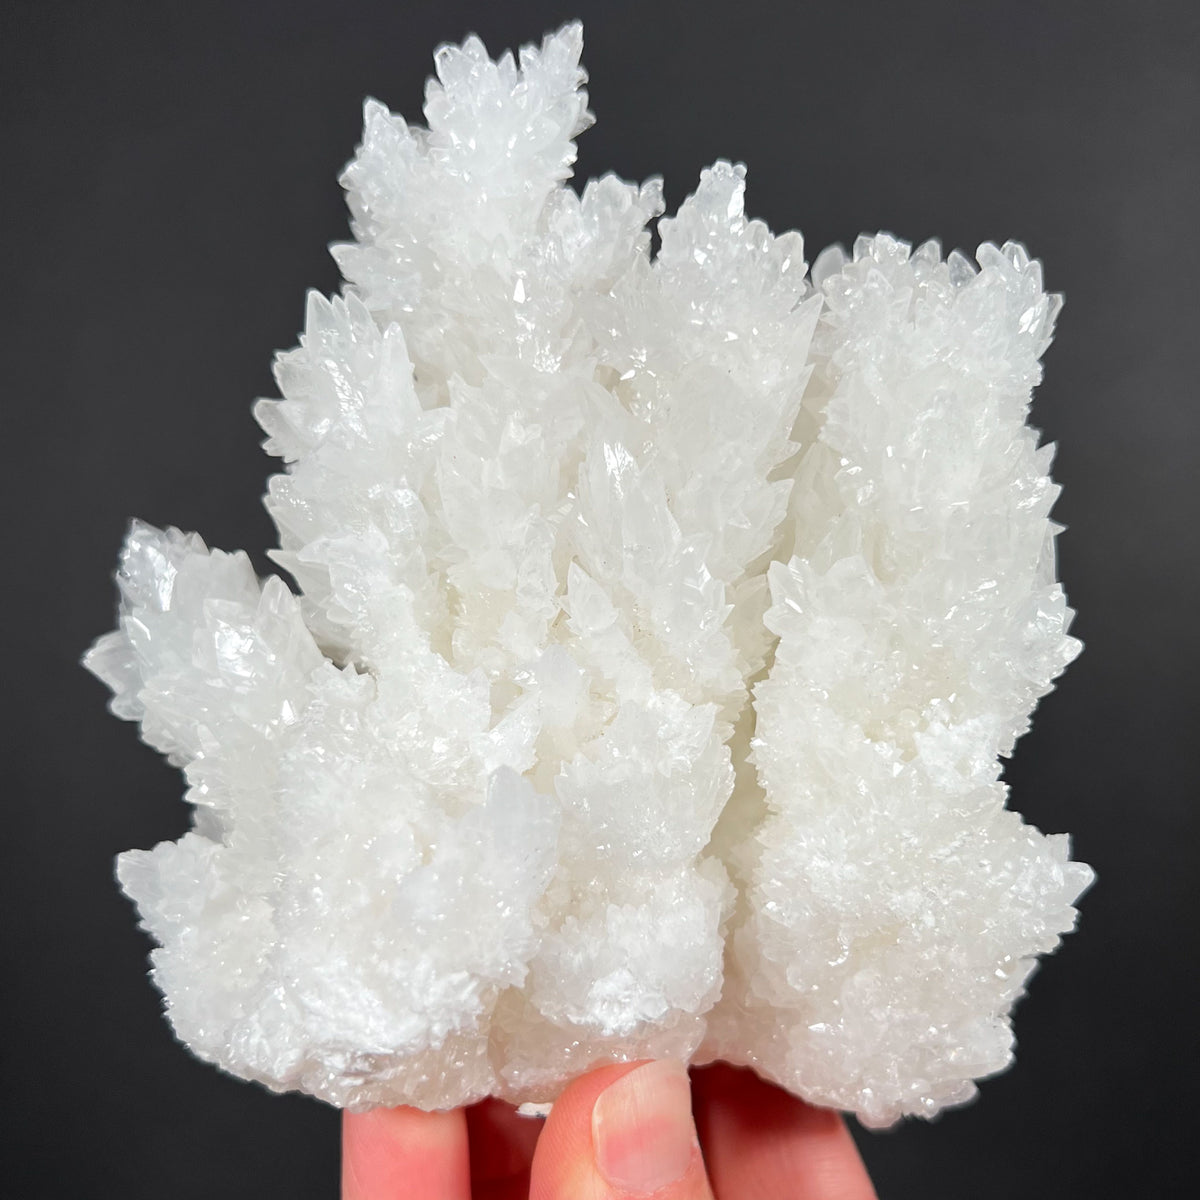 Cave Calcite and Aragonite crystals from Mexico